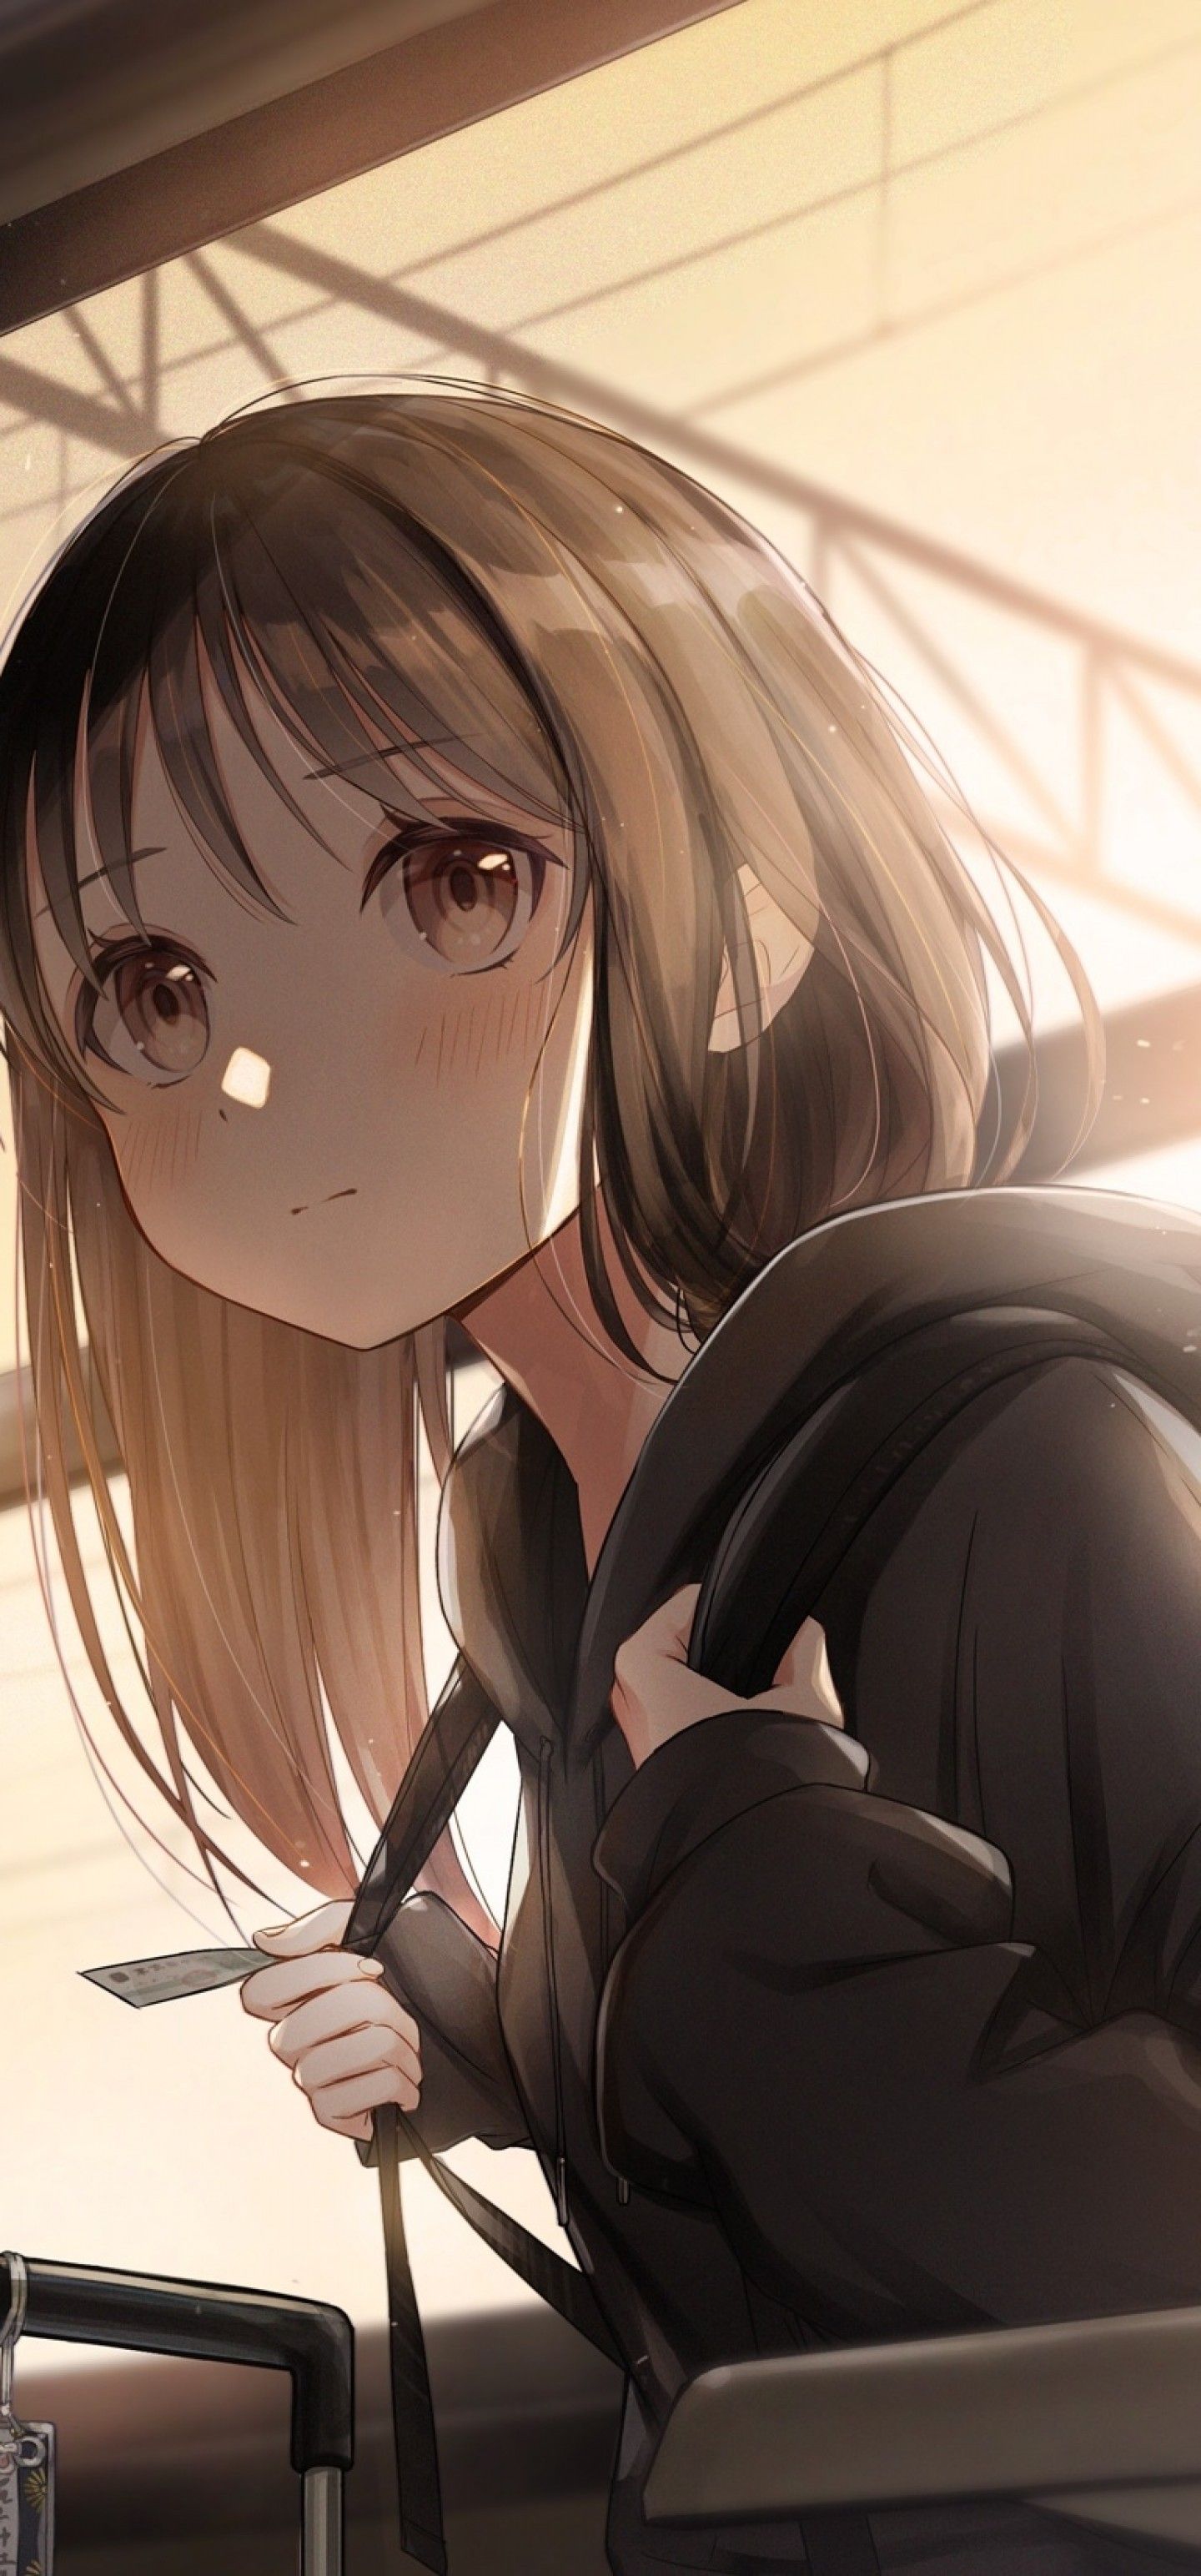 Download 1440x3088 Cute Anime Girl, Hoodie, Short Hair, Train, Brown Hair Wallpapers for Samsung Galaxy Note 20 Ultra